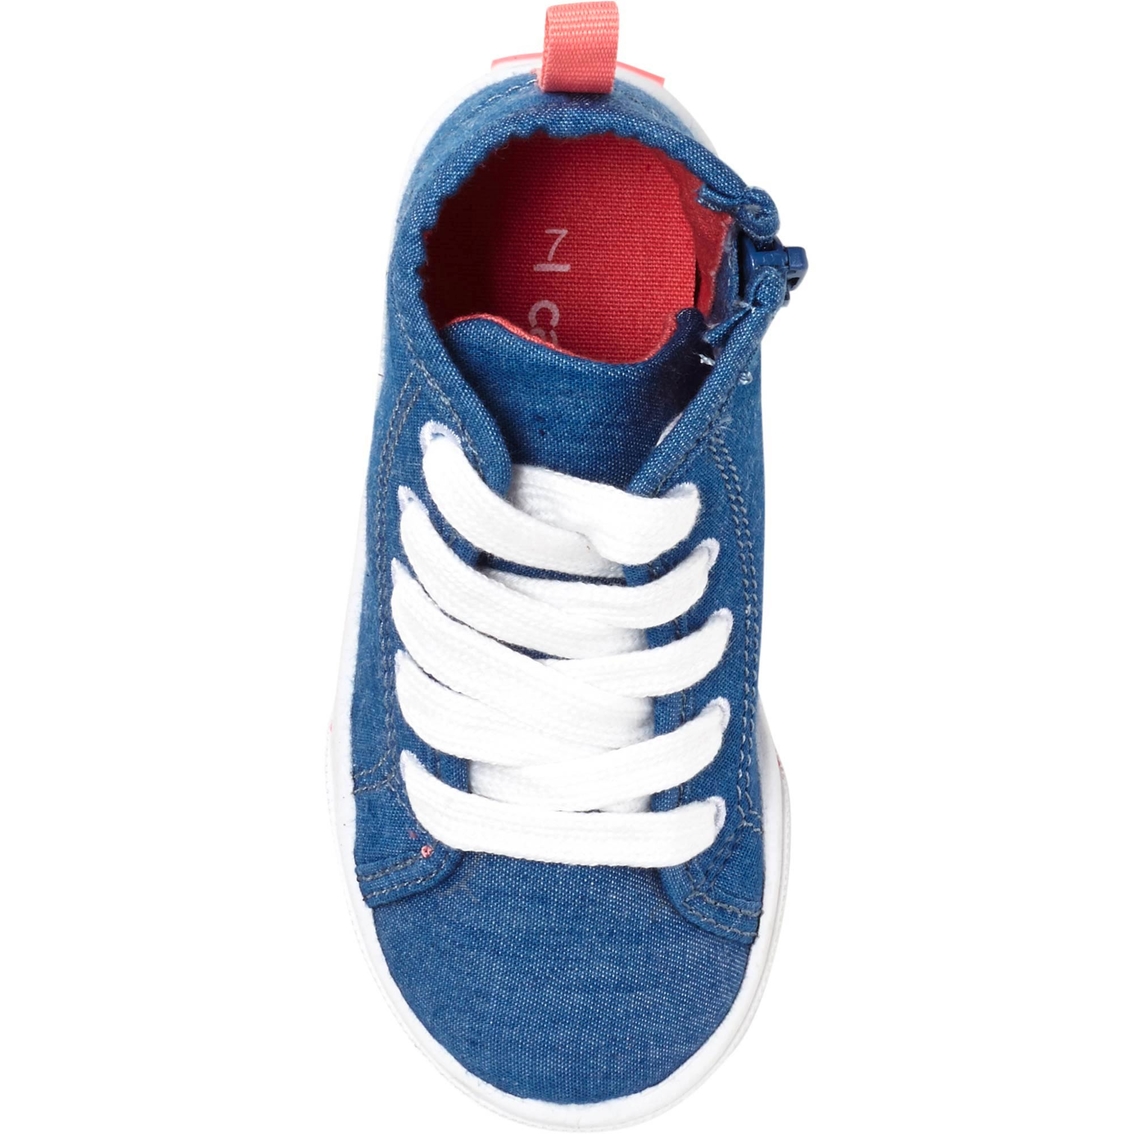 Carter's Toddler Girls High Top Sneakers - Image 3 of 4